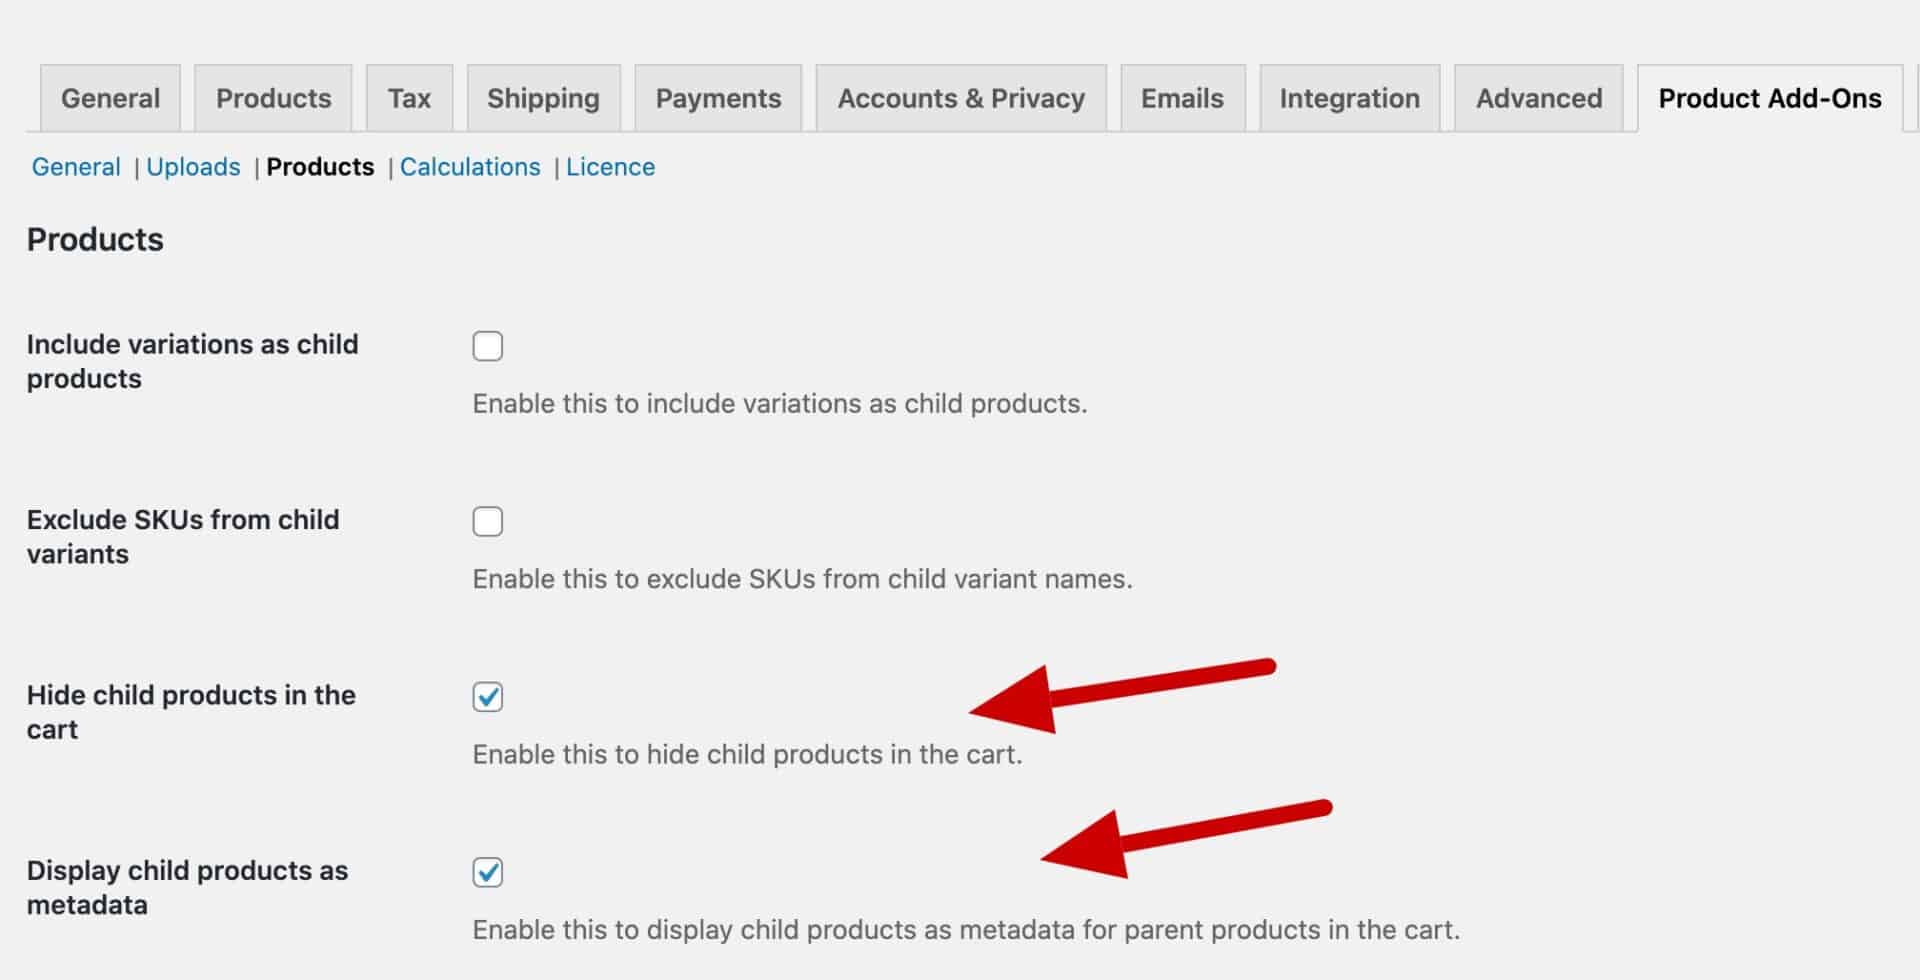 Child product metadata settings - hiding them from the card and displaying them as metadata